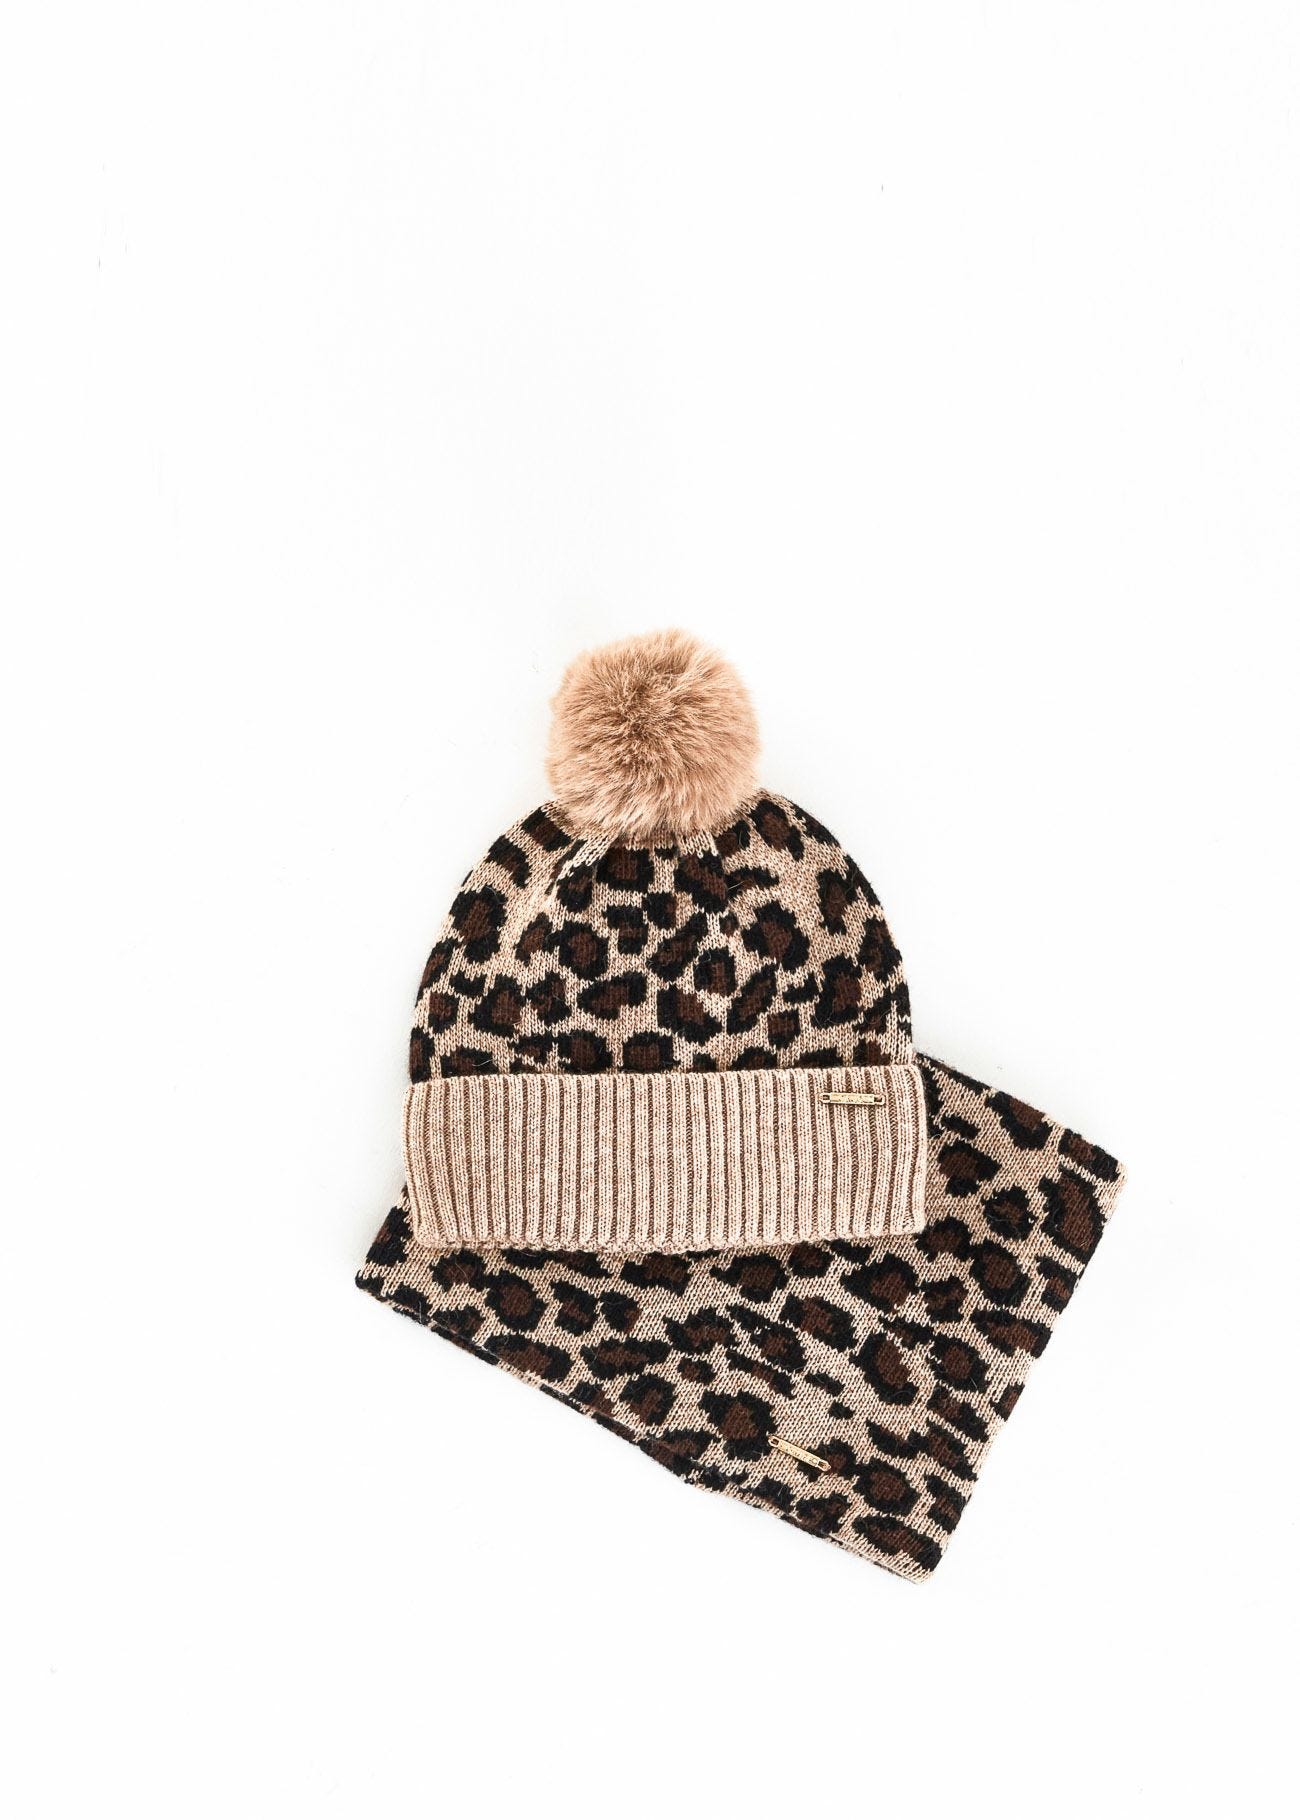 Animal-print scarf and hat